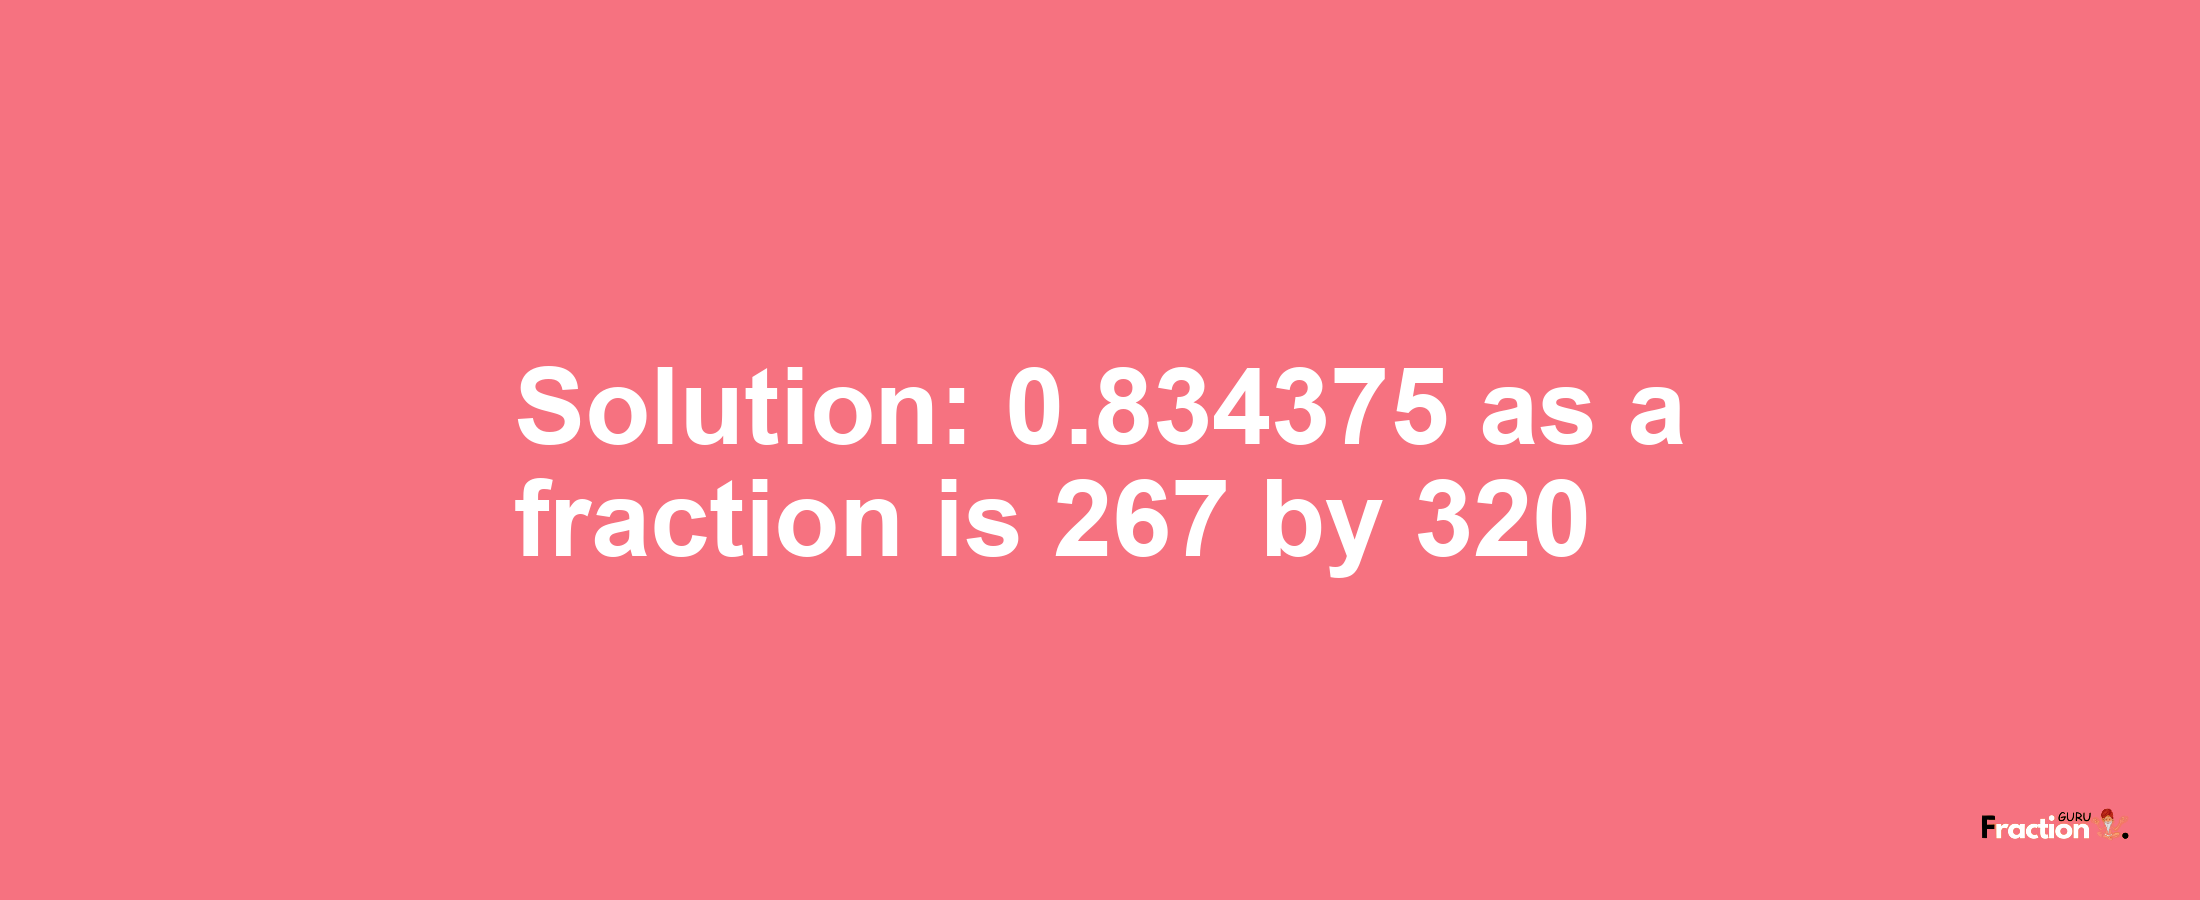 Solution:0.834375 as a fraction is 267/320